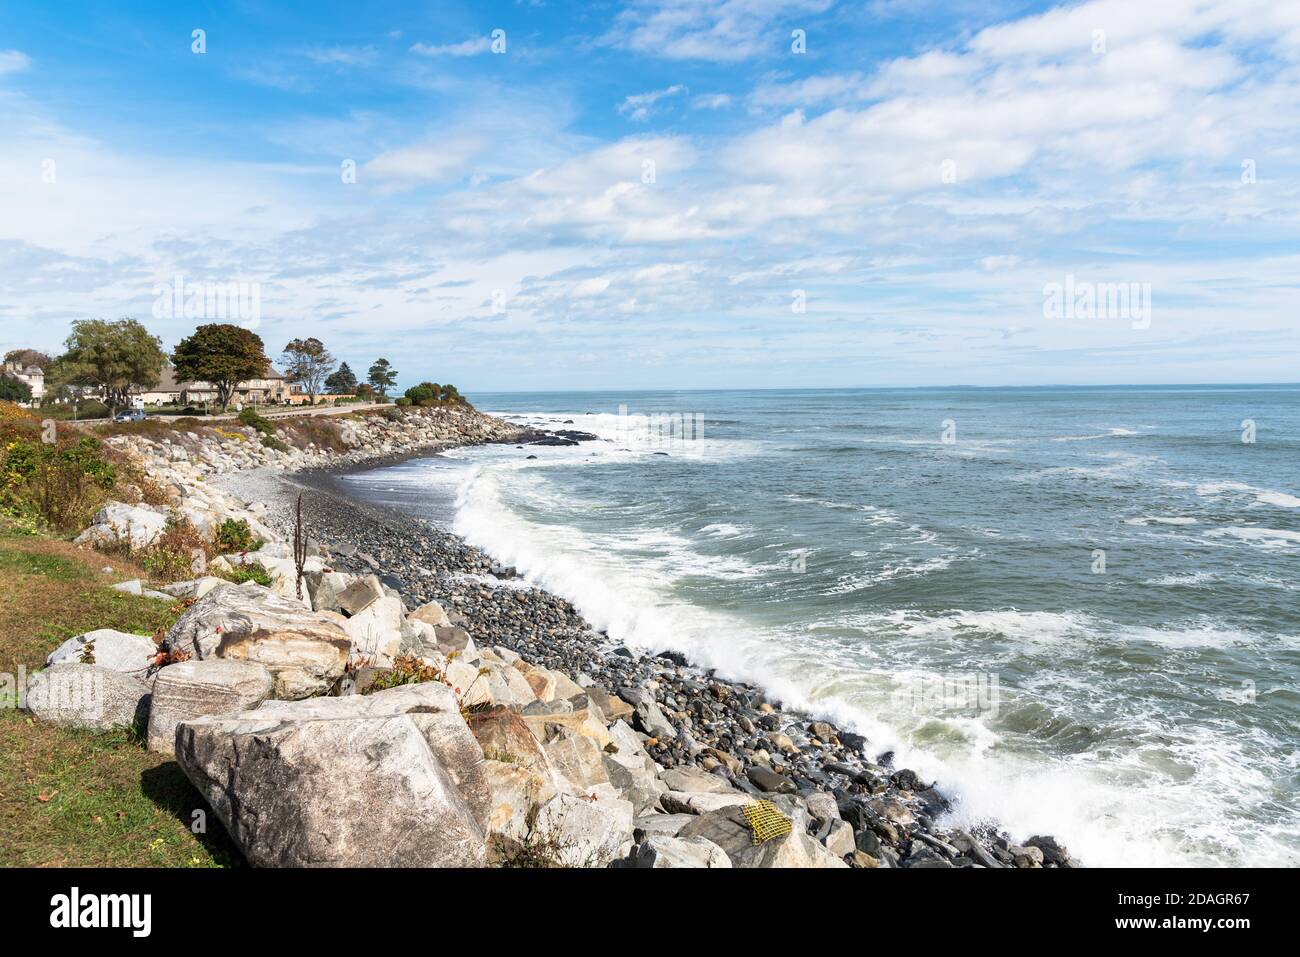 Small pebble beach along the coast of New Hampshire on a sunny autumn day. A clifftop coastal road lined with houses is visible in background. Stock Photo